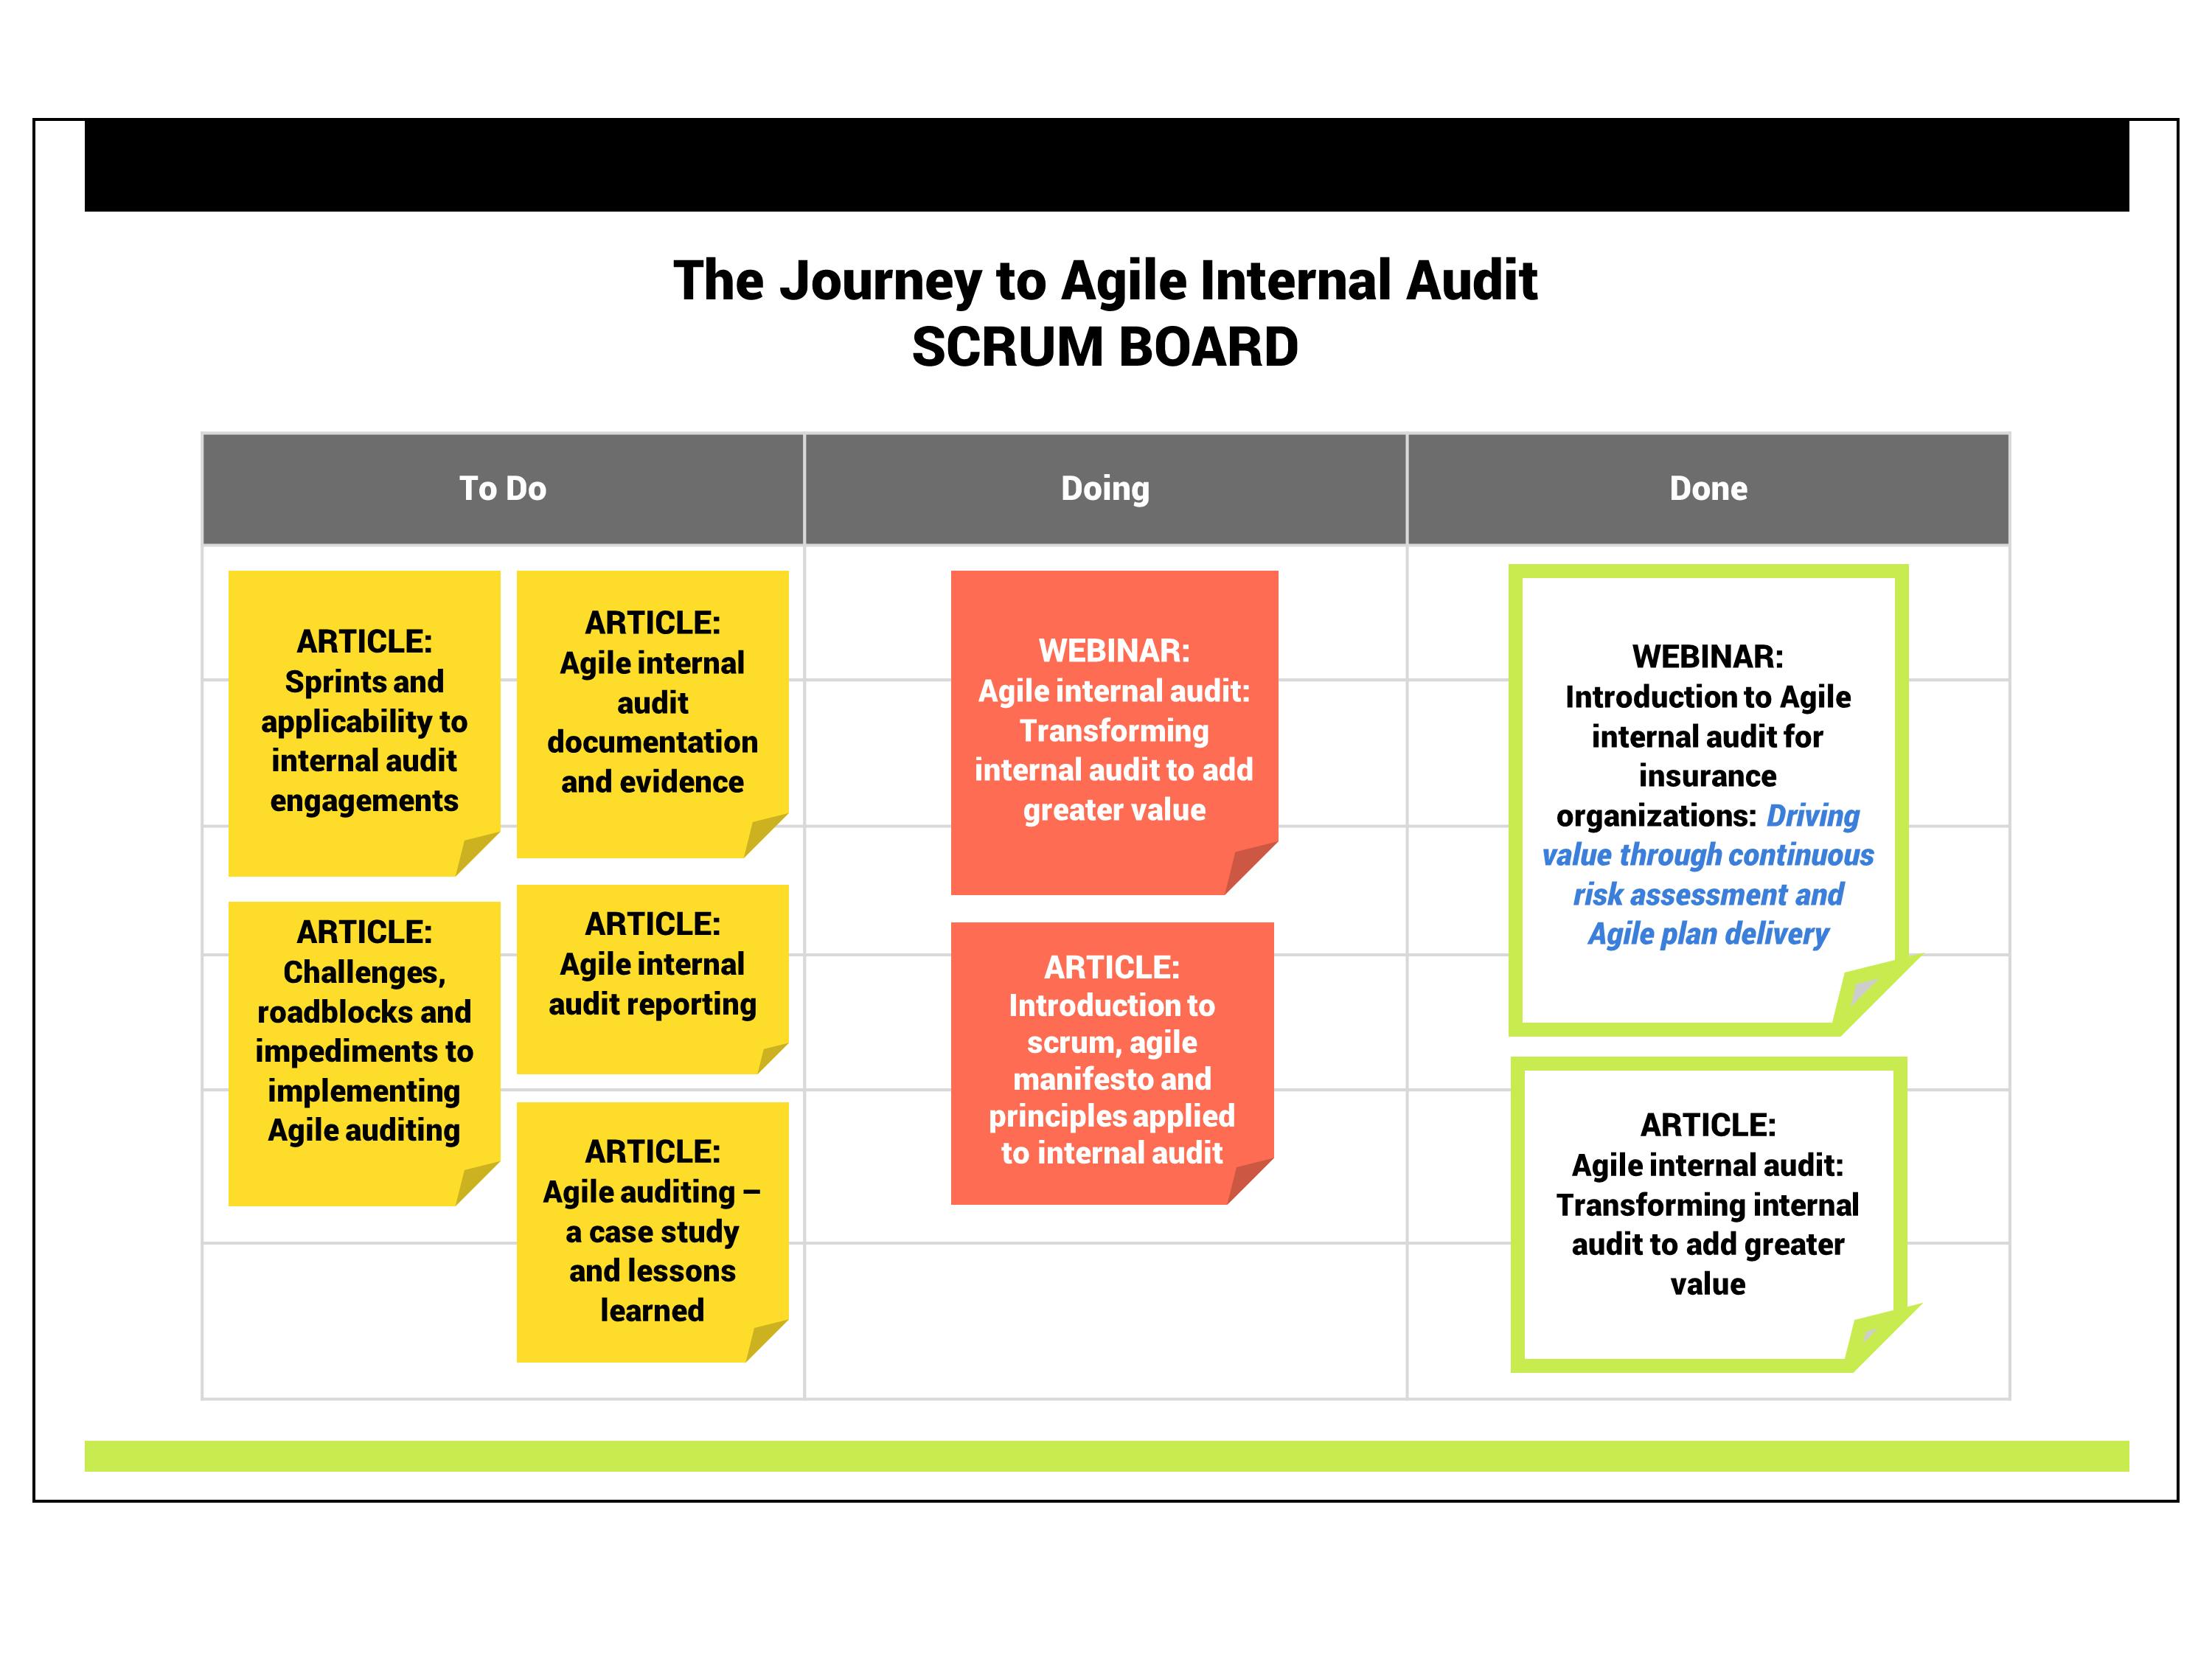 The Journey to Agile Internal Audit | Scrum board